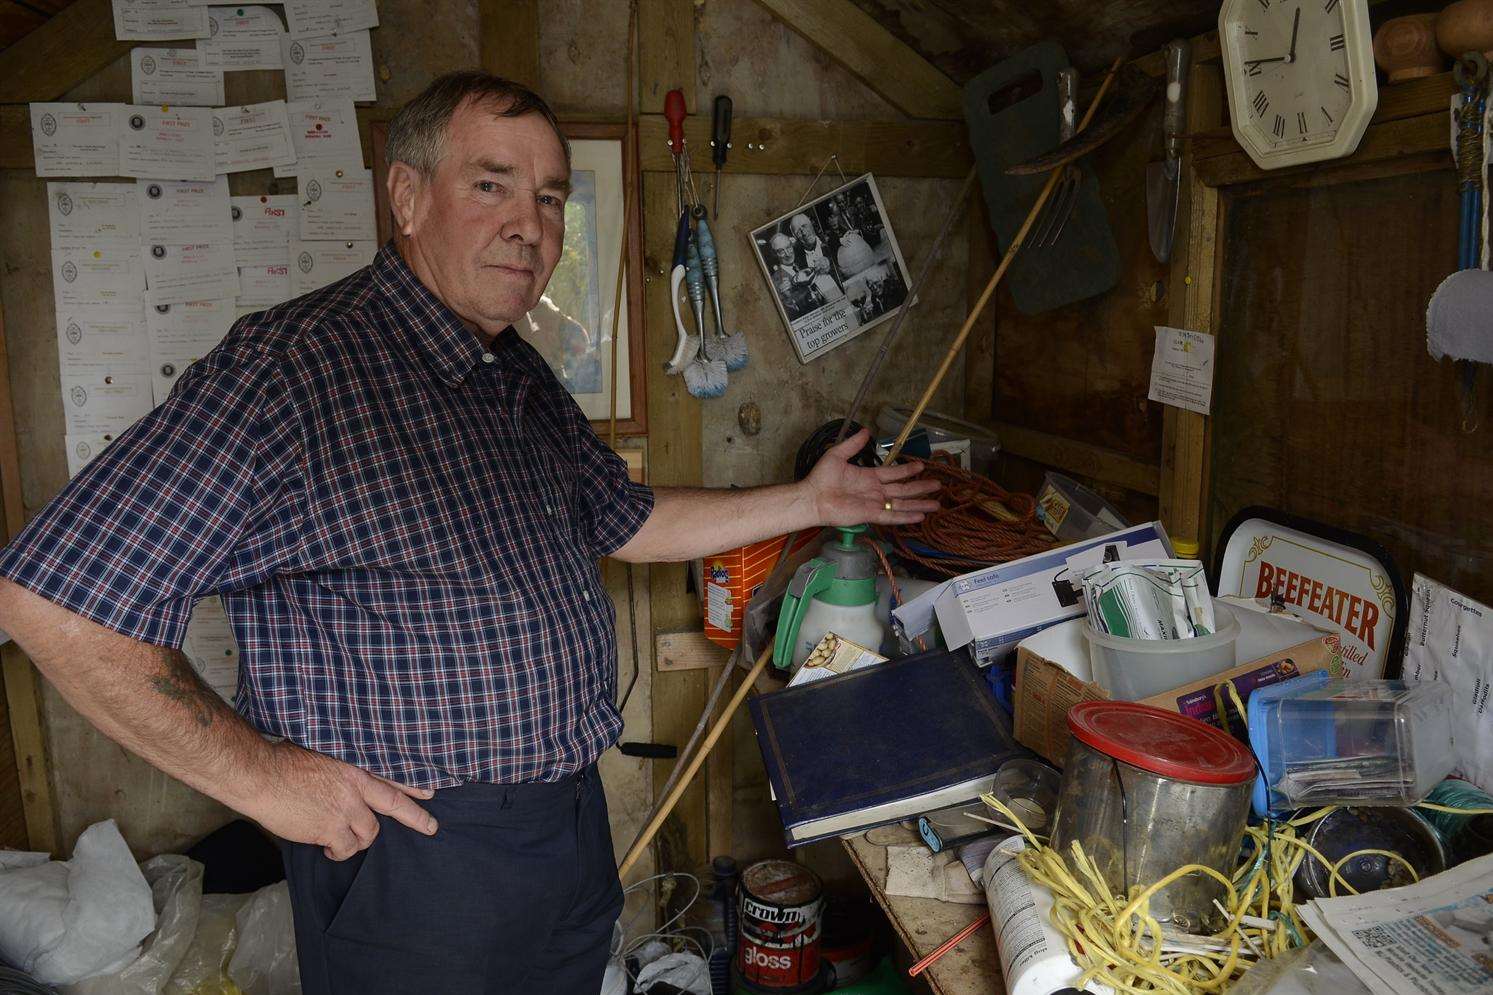 Warwick Stevens found his shed broken into and items stolen again